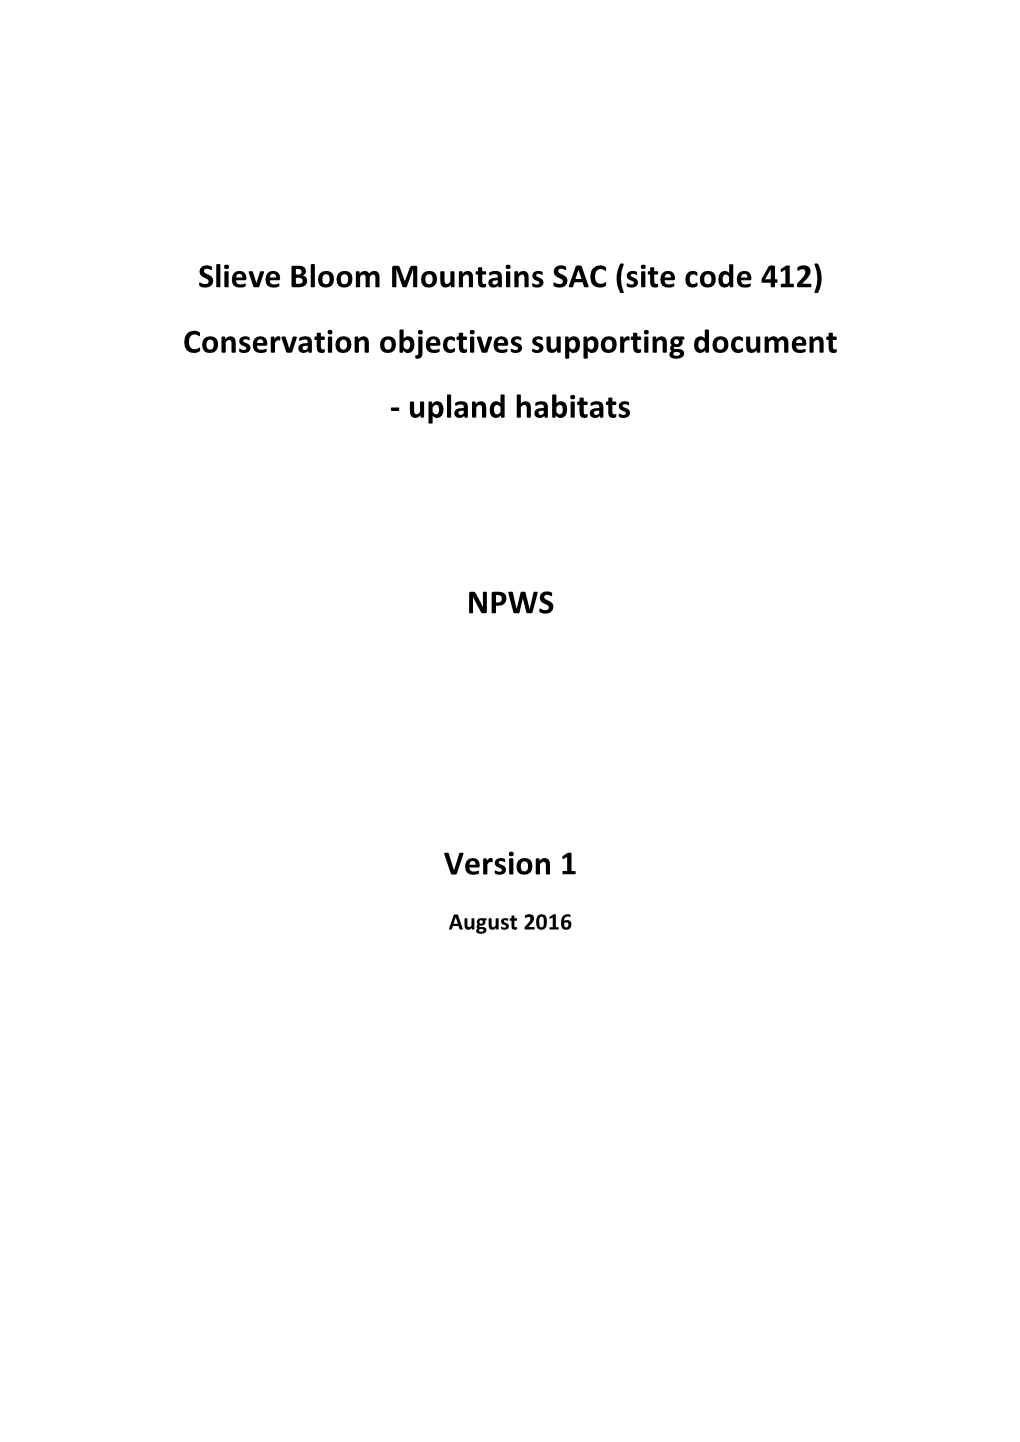 Slieve Bloom Mountains SAC (Site Code 412) Conservation Objectives Supporting Document - Upland Habitats